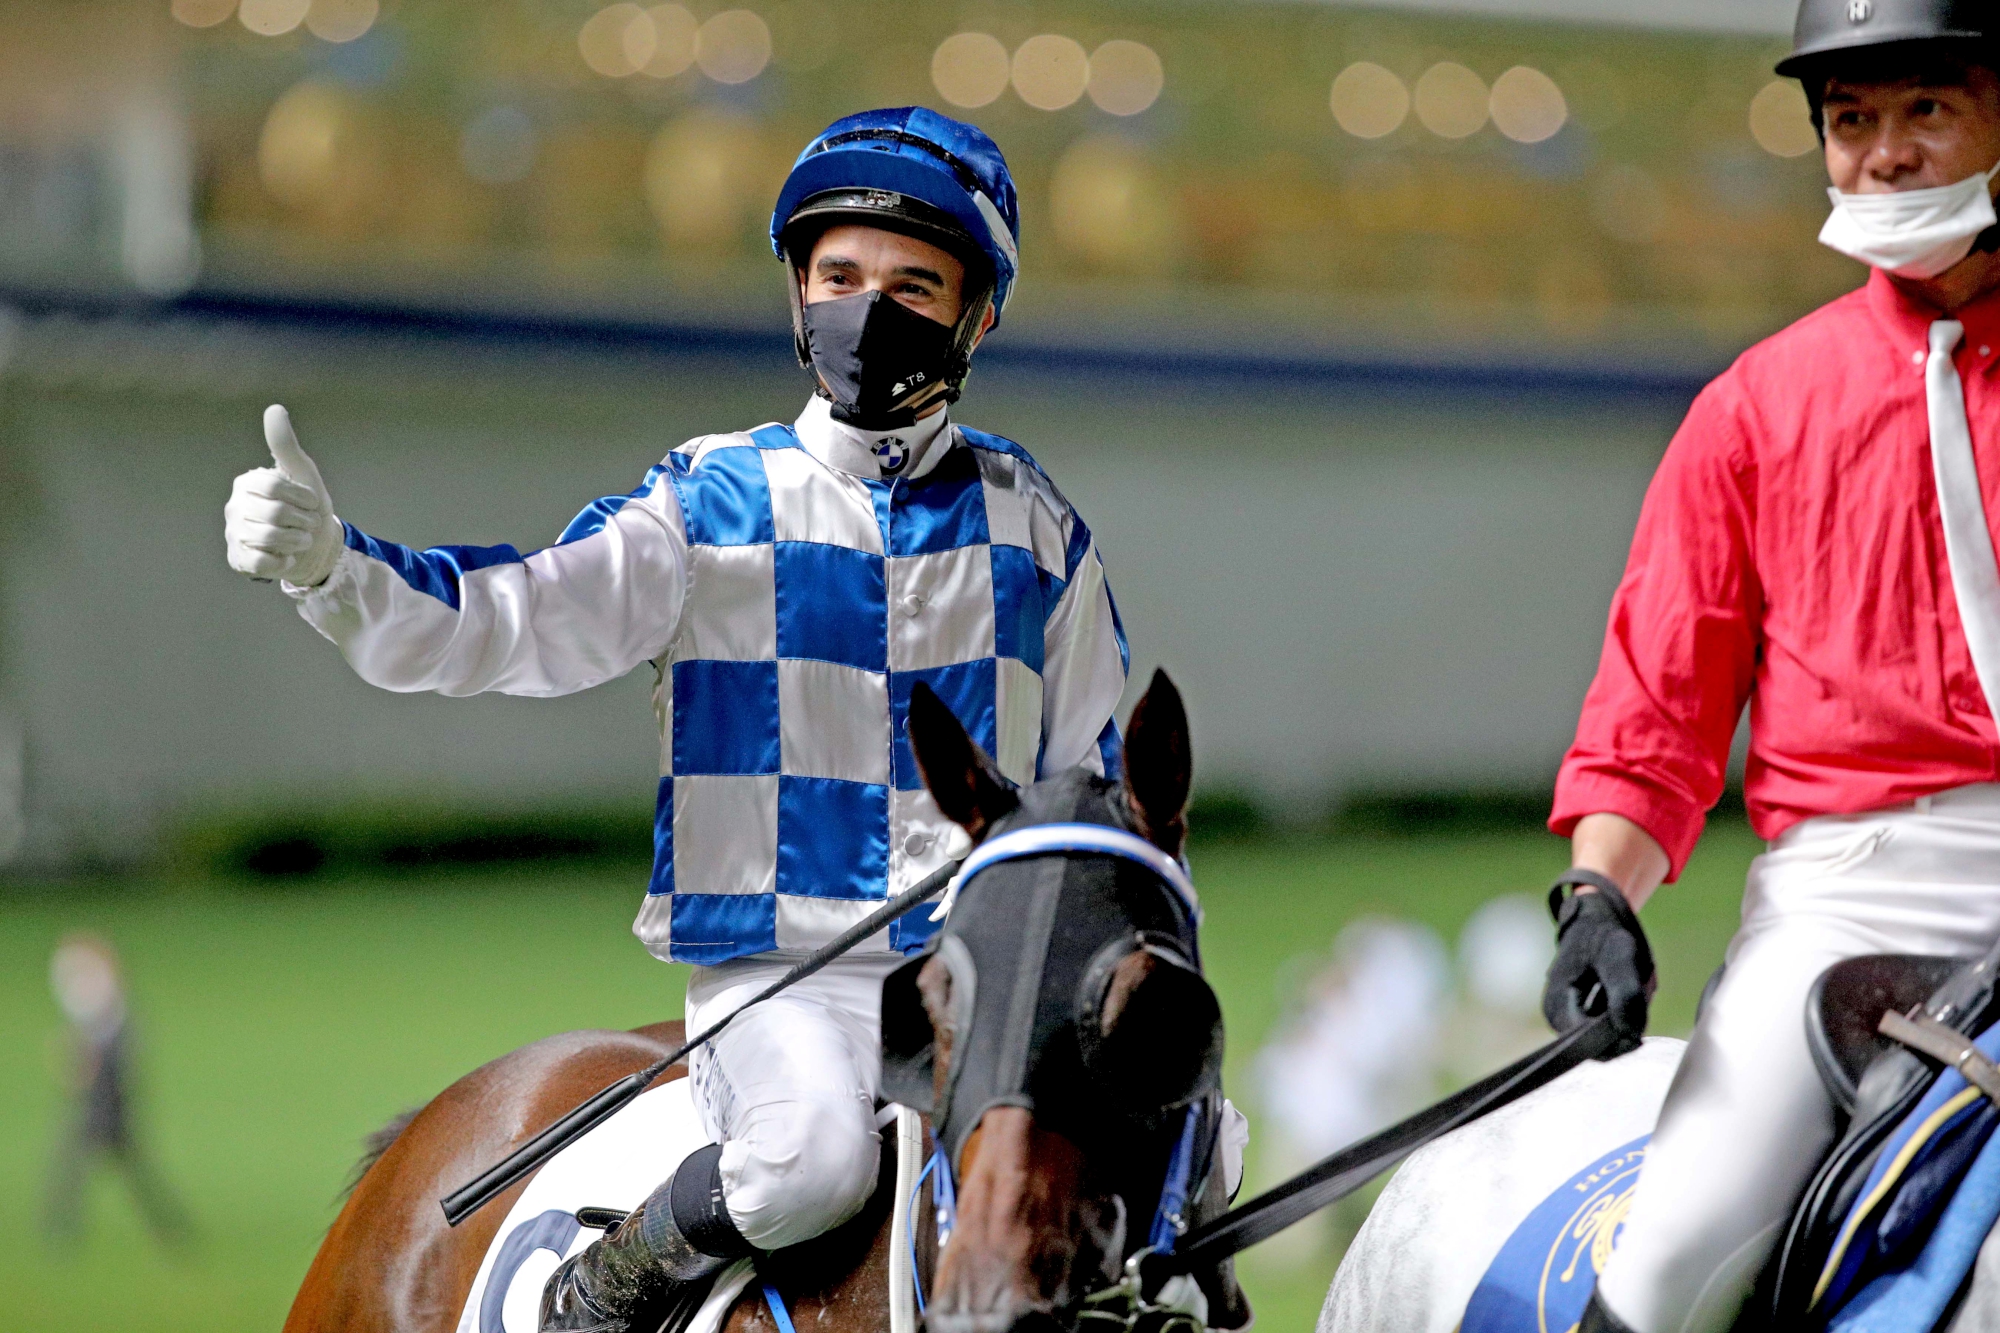 Joao Moreira is on the charge.